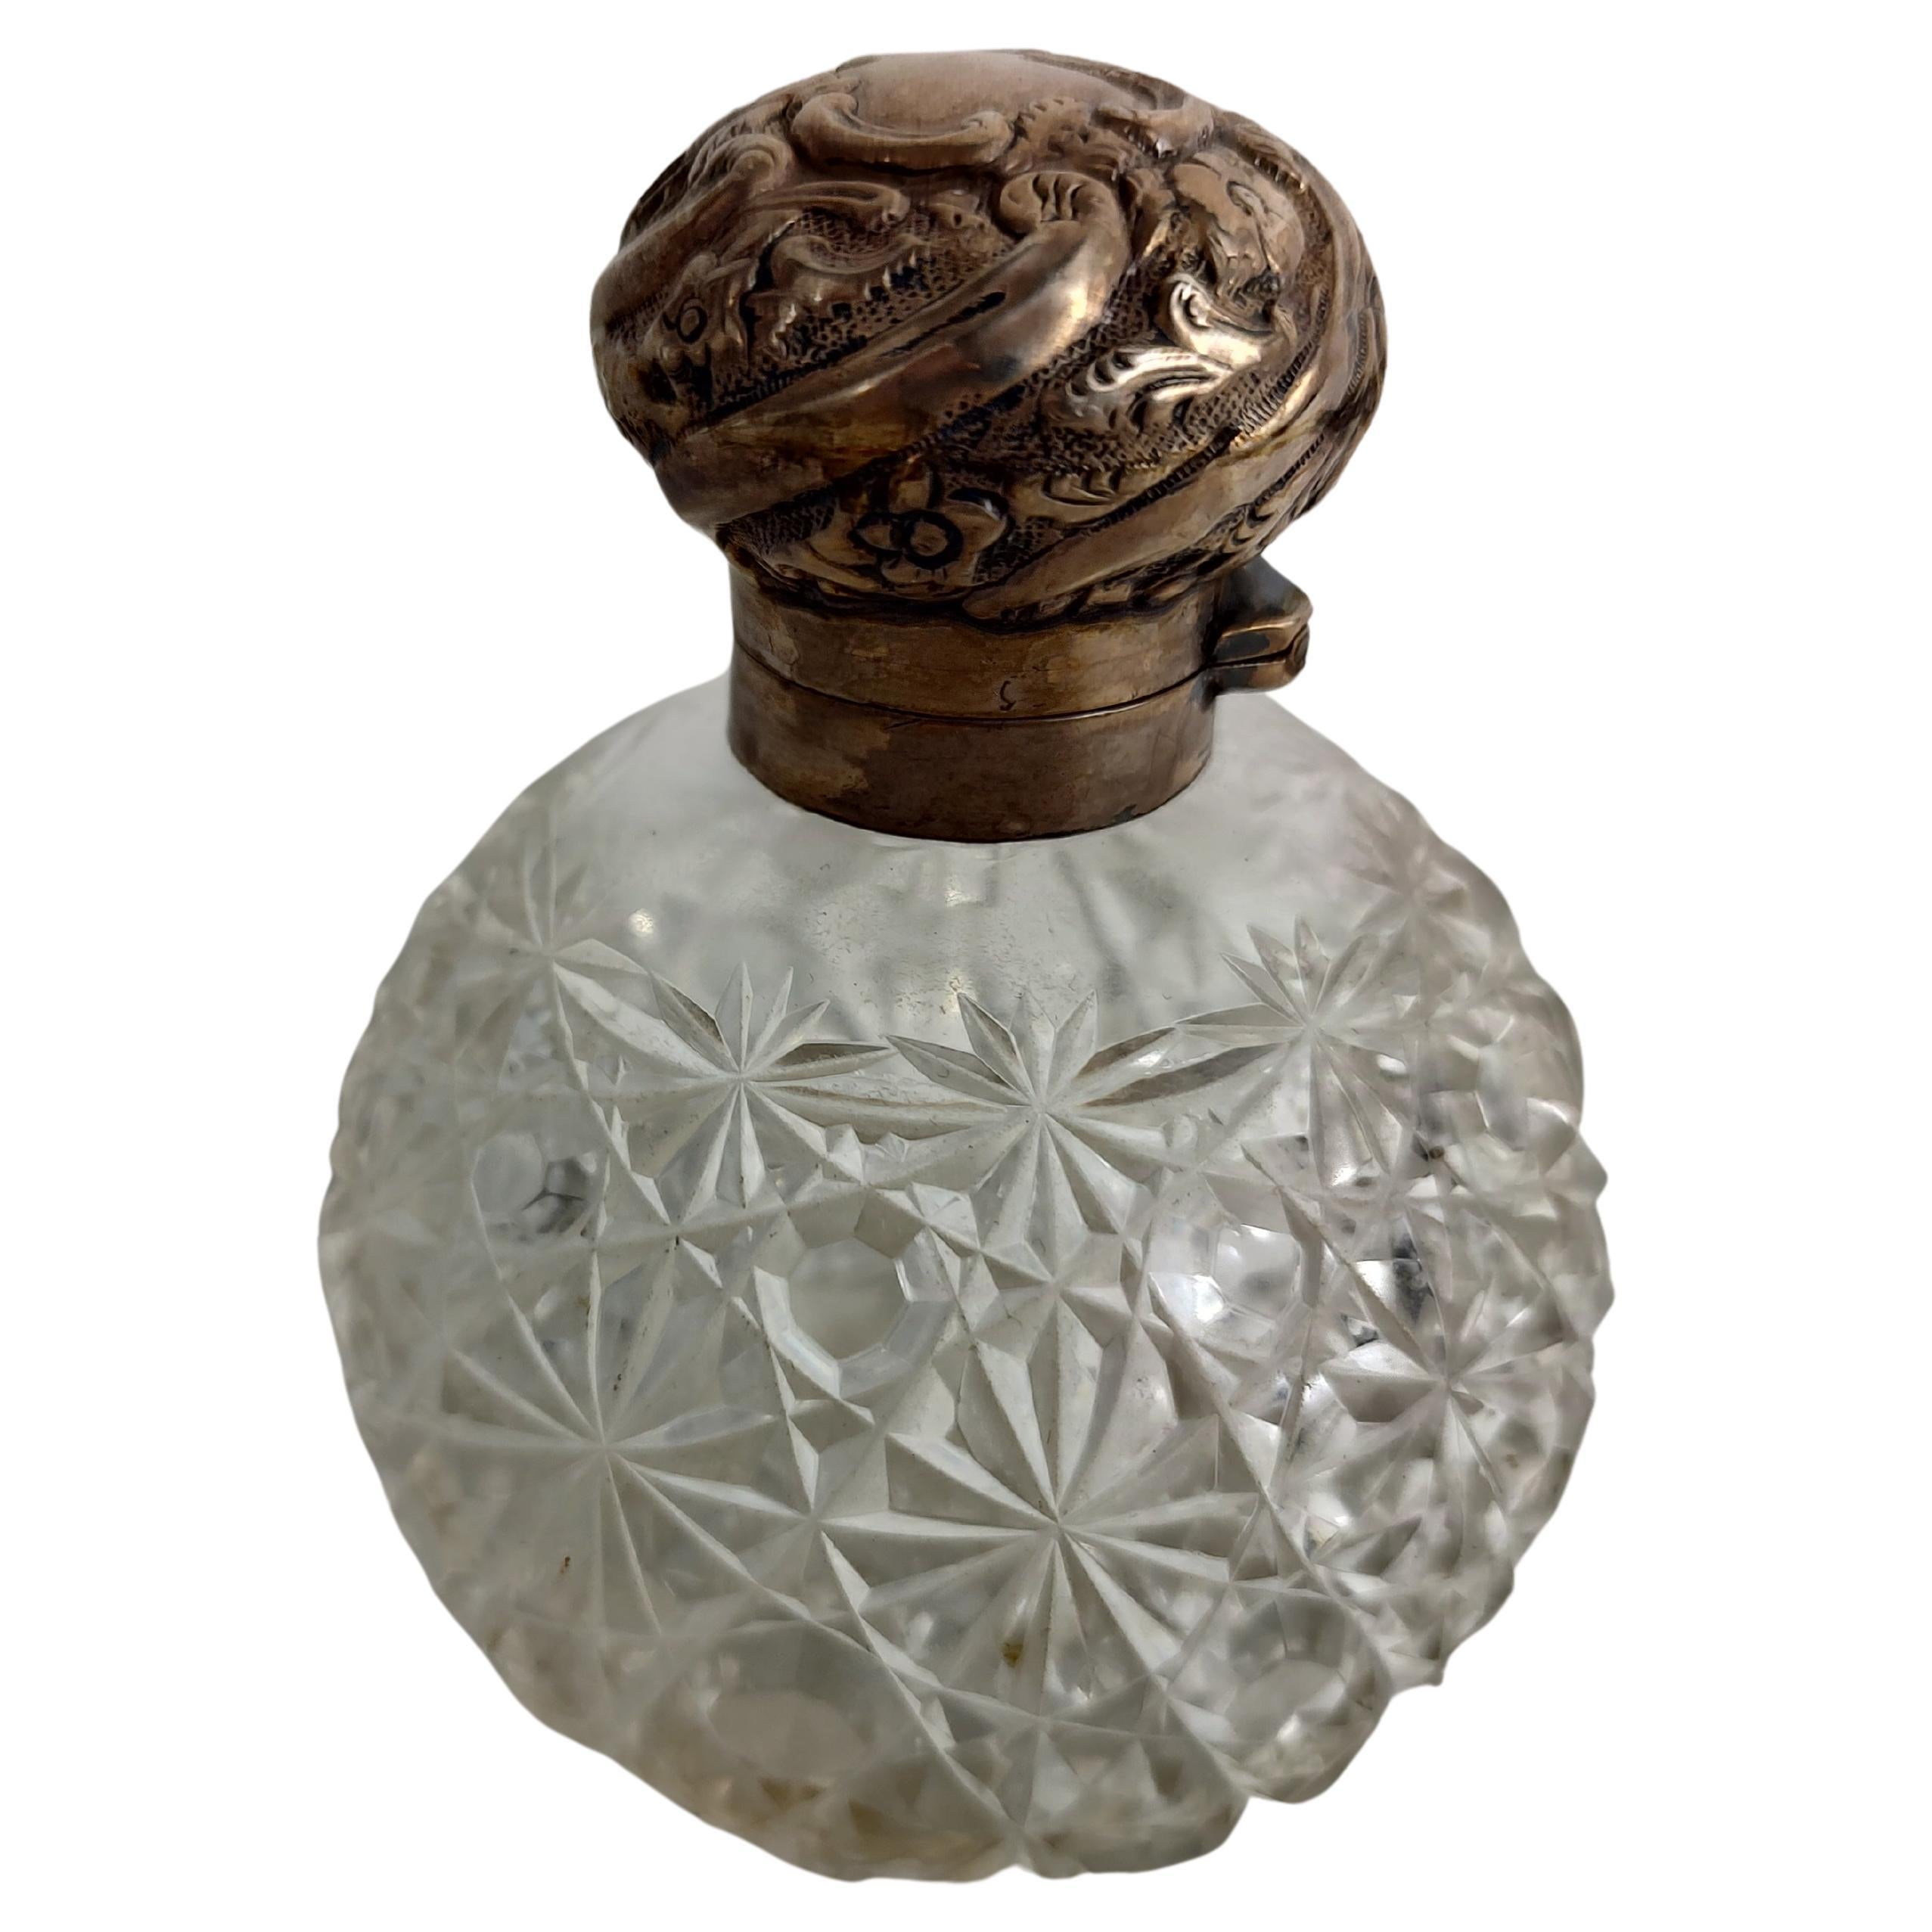 Antique Brilliant Cut Glass Perfume Bottle with Sterling Silver Top Cap For Sale